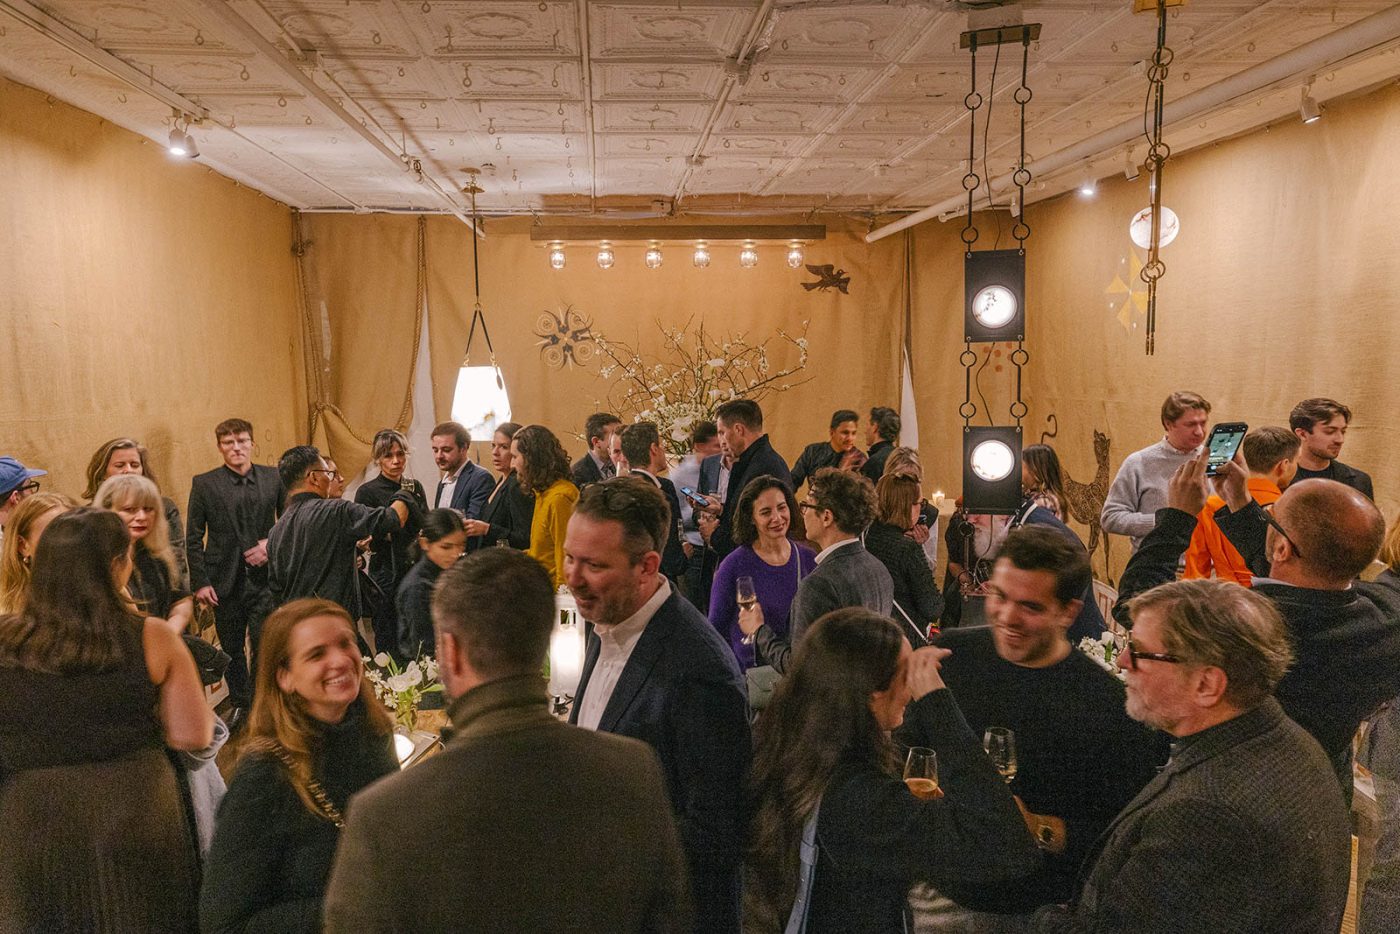 Guests mingle in the Remains Lighting Company's Manhattan showroom during the launch party for Matthew Fisher's Ariadne lighting collection.